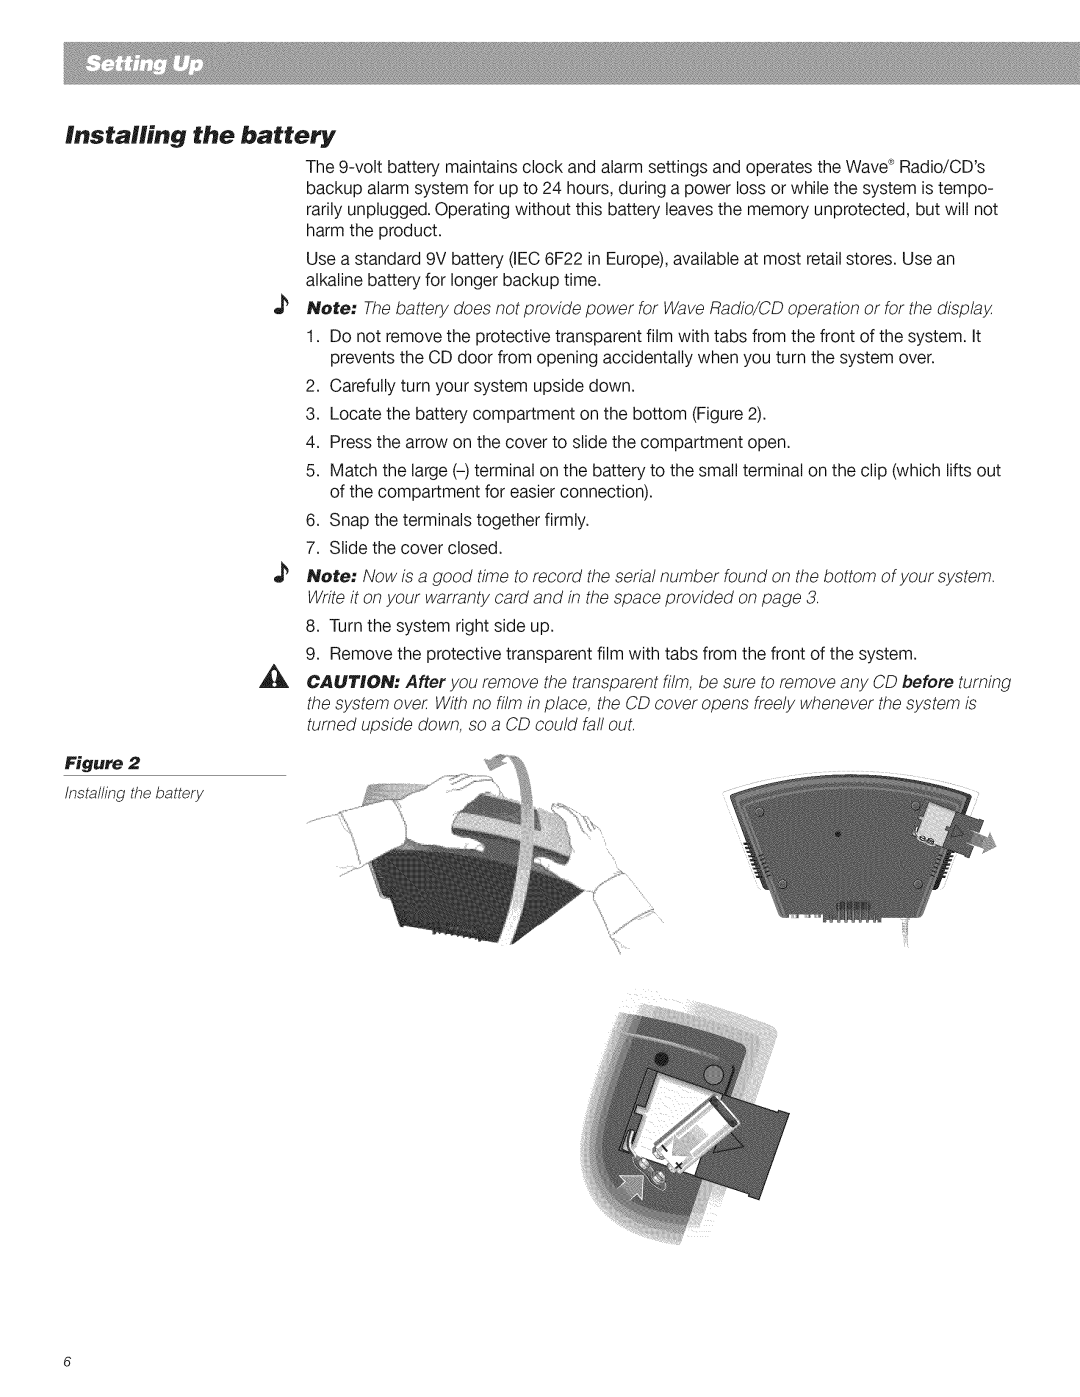 Bose CD Player manual Installing the battery 